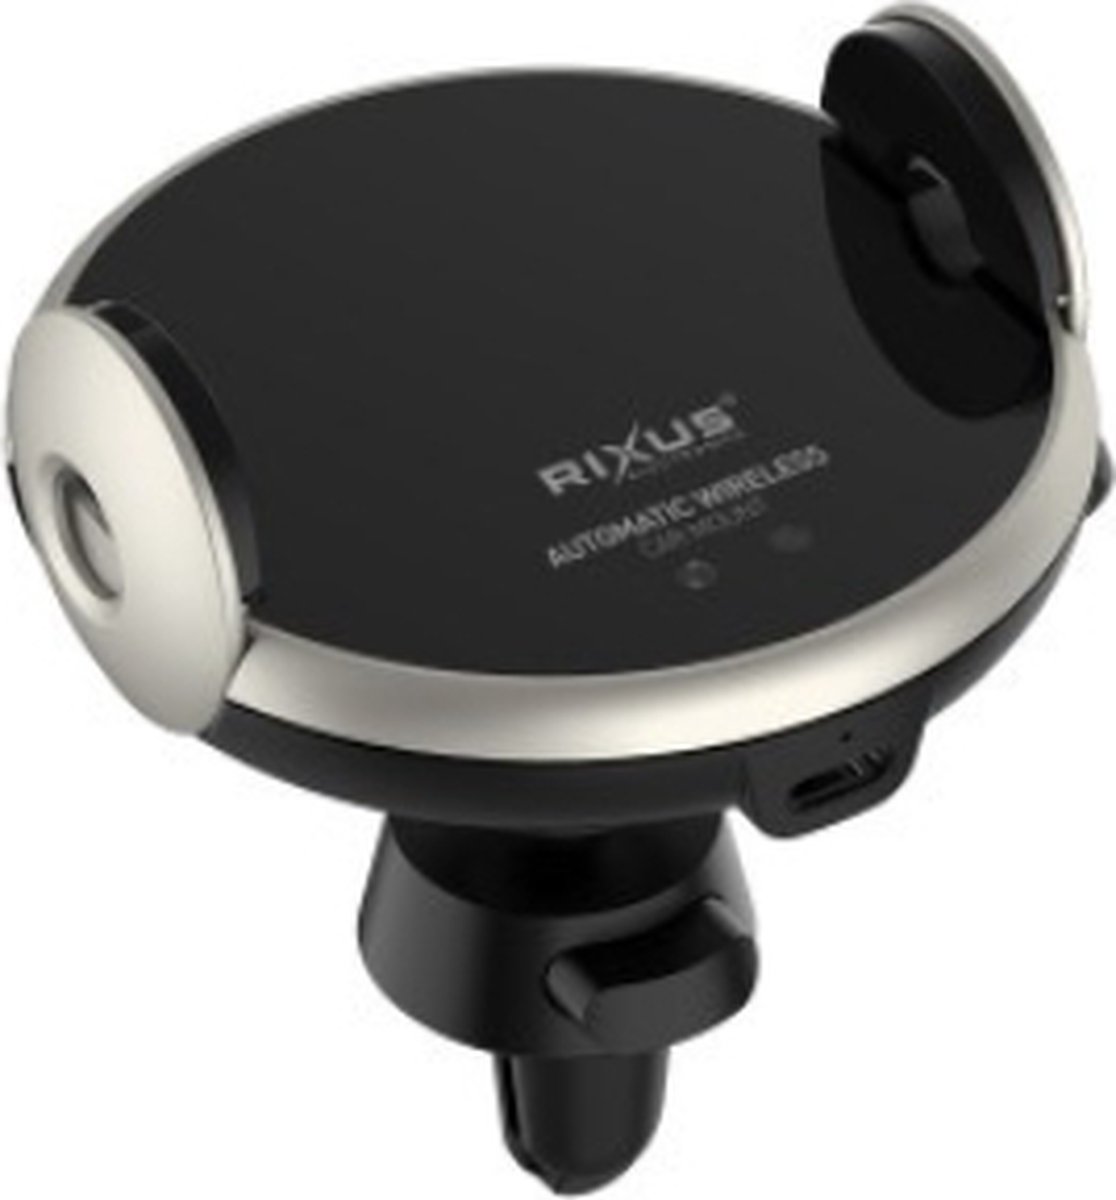 RIXUS - Fast wireless car charger - autohouder ventilatie - Auto clamping vent rooster - Extra snel draadloze lader - verstelbaar - verstelbare autohouder - 15W out out - Wireless charging IOS and ANDROID - draadloze lader auto houder